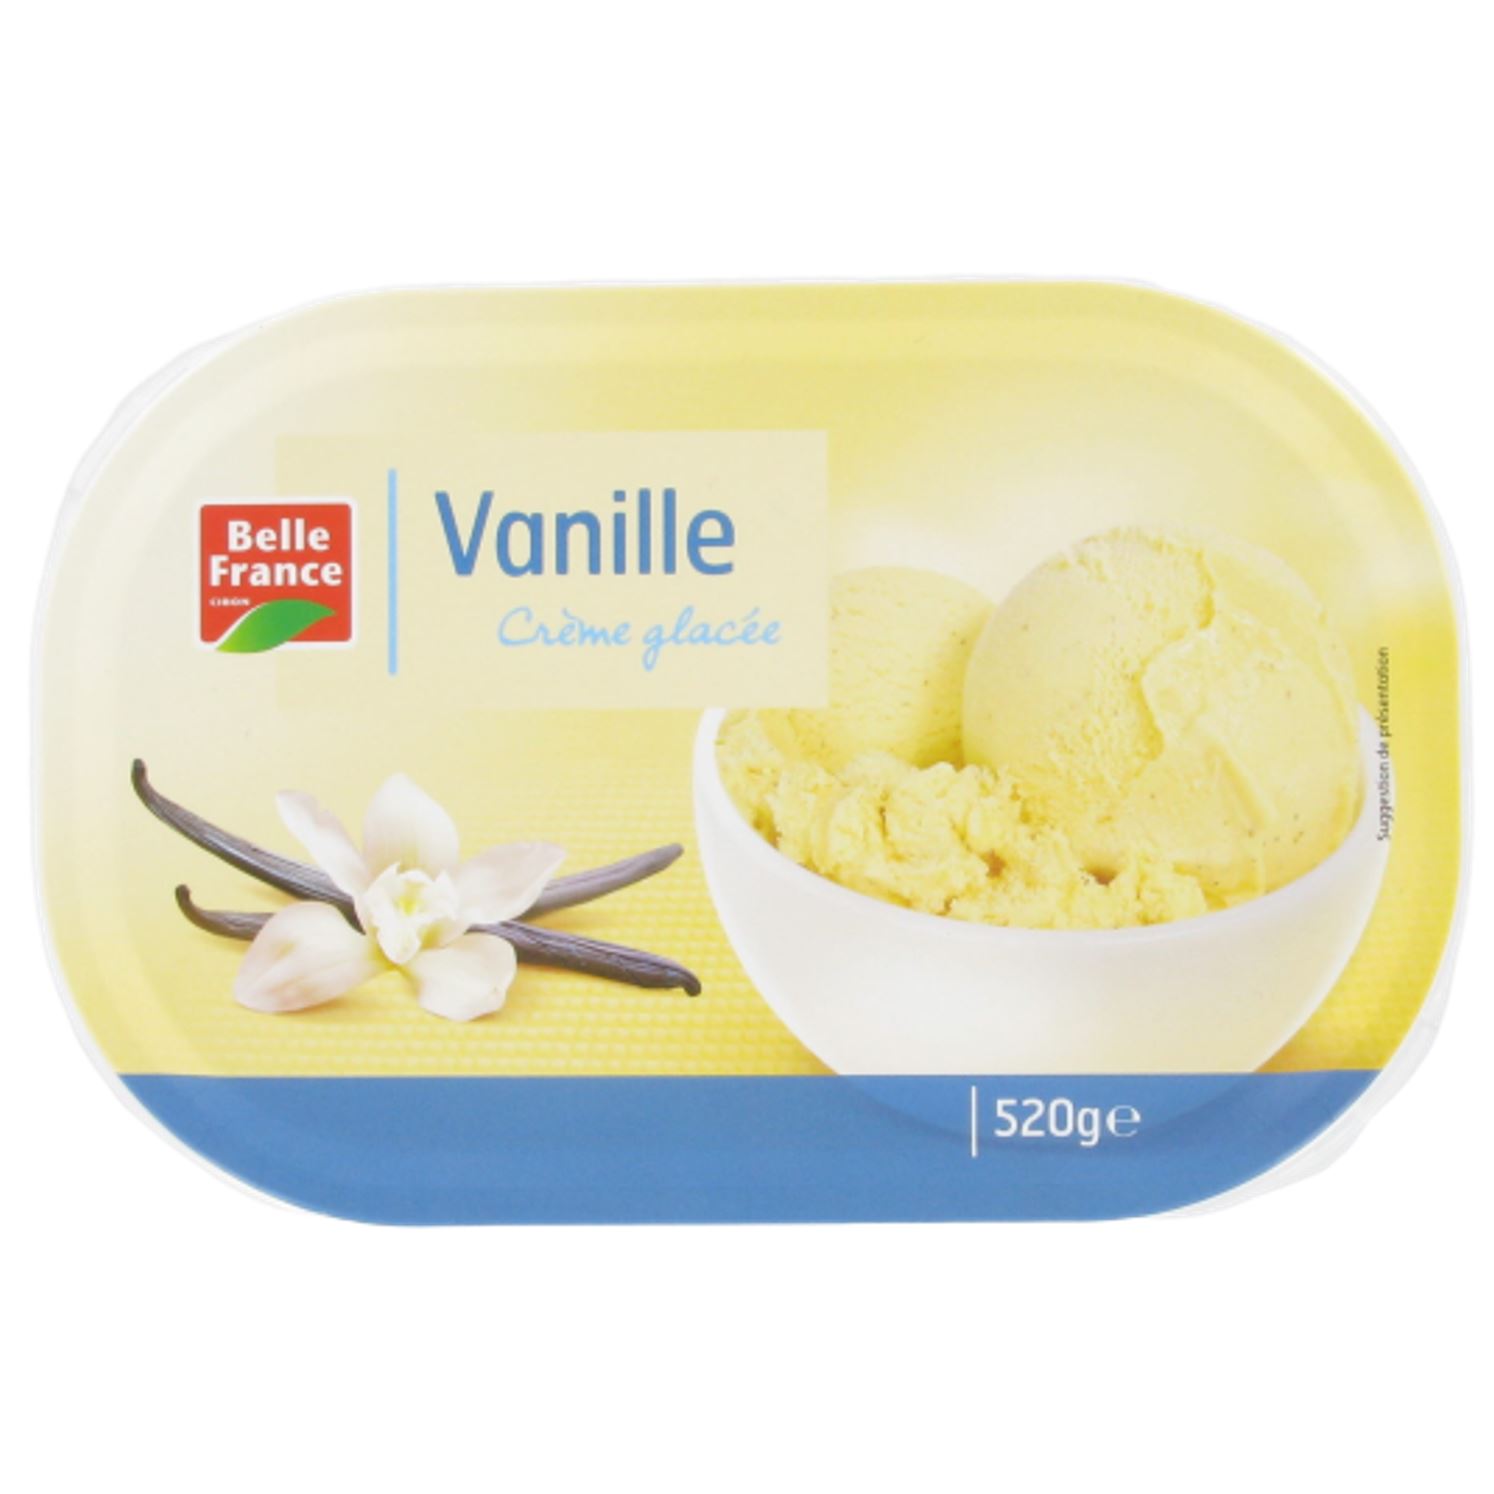 CREME GLACEE VANILLE BF BAC 1 L 520